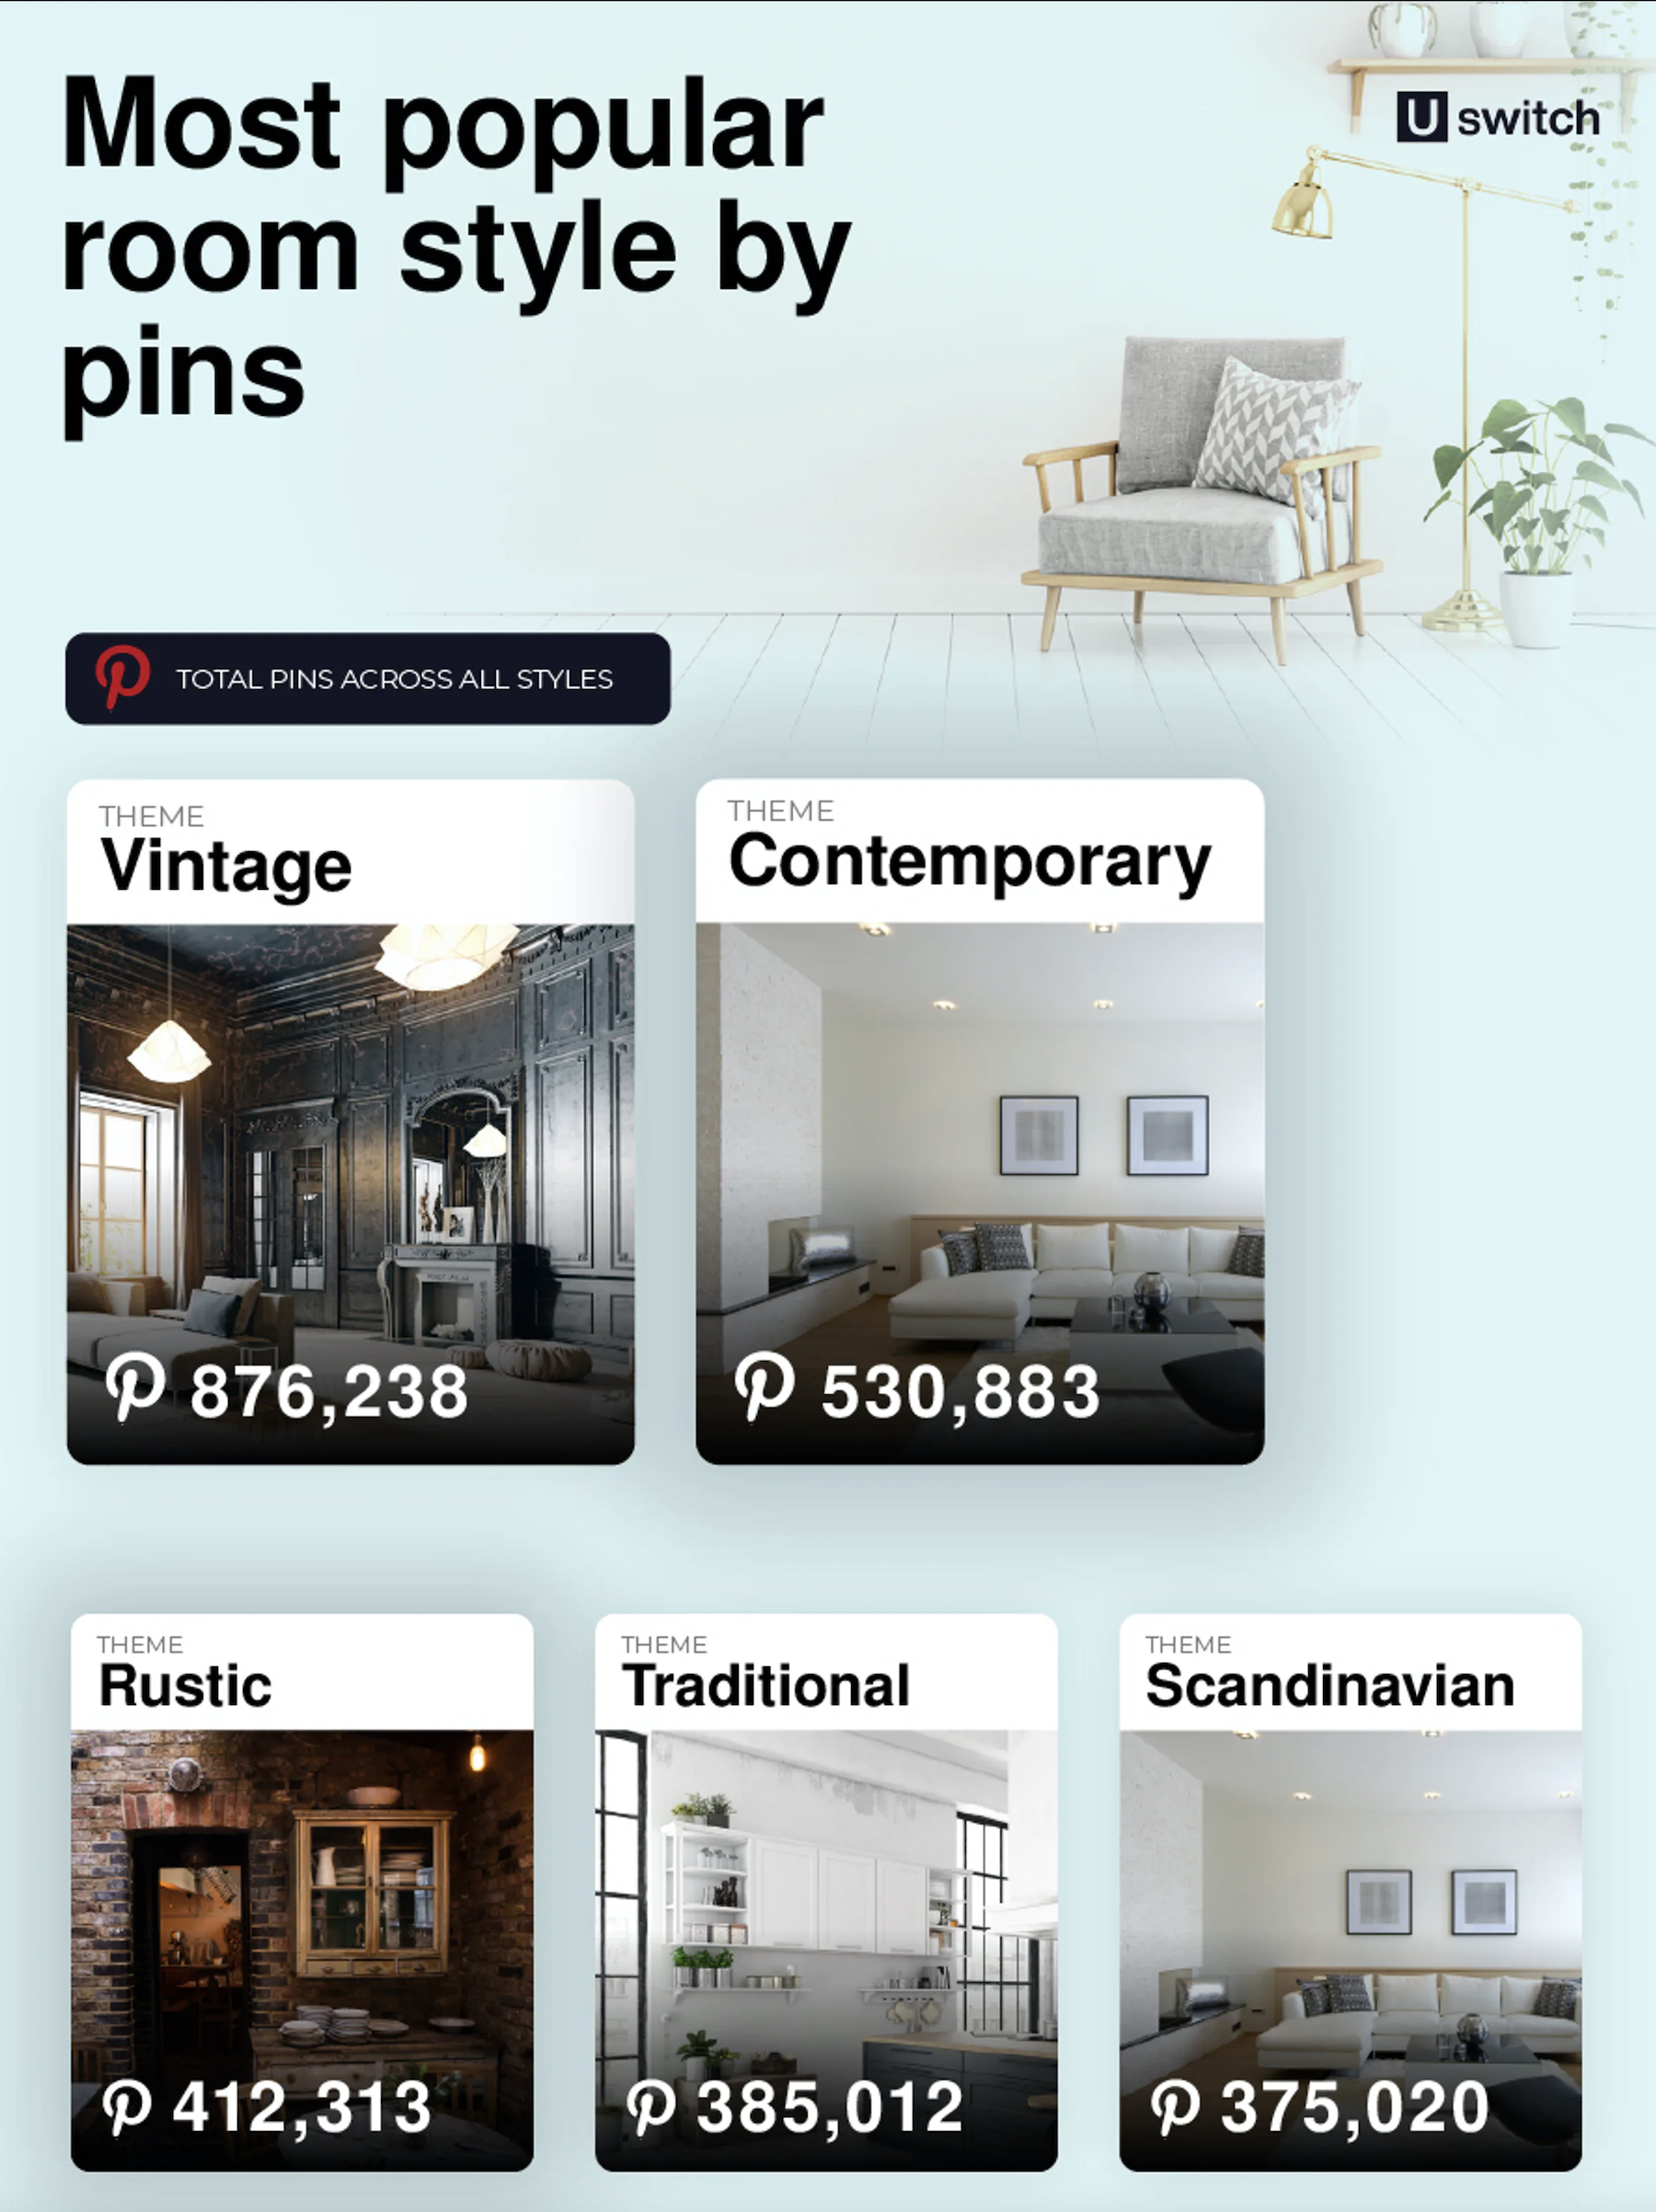 A graphic of most popular room styles by pins